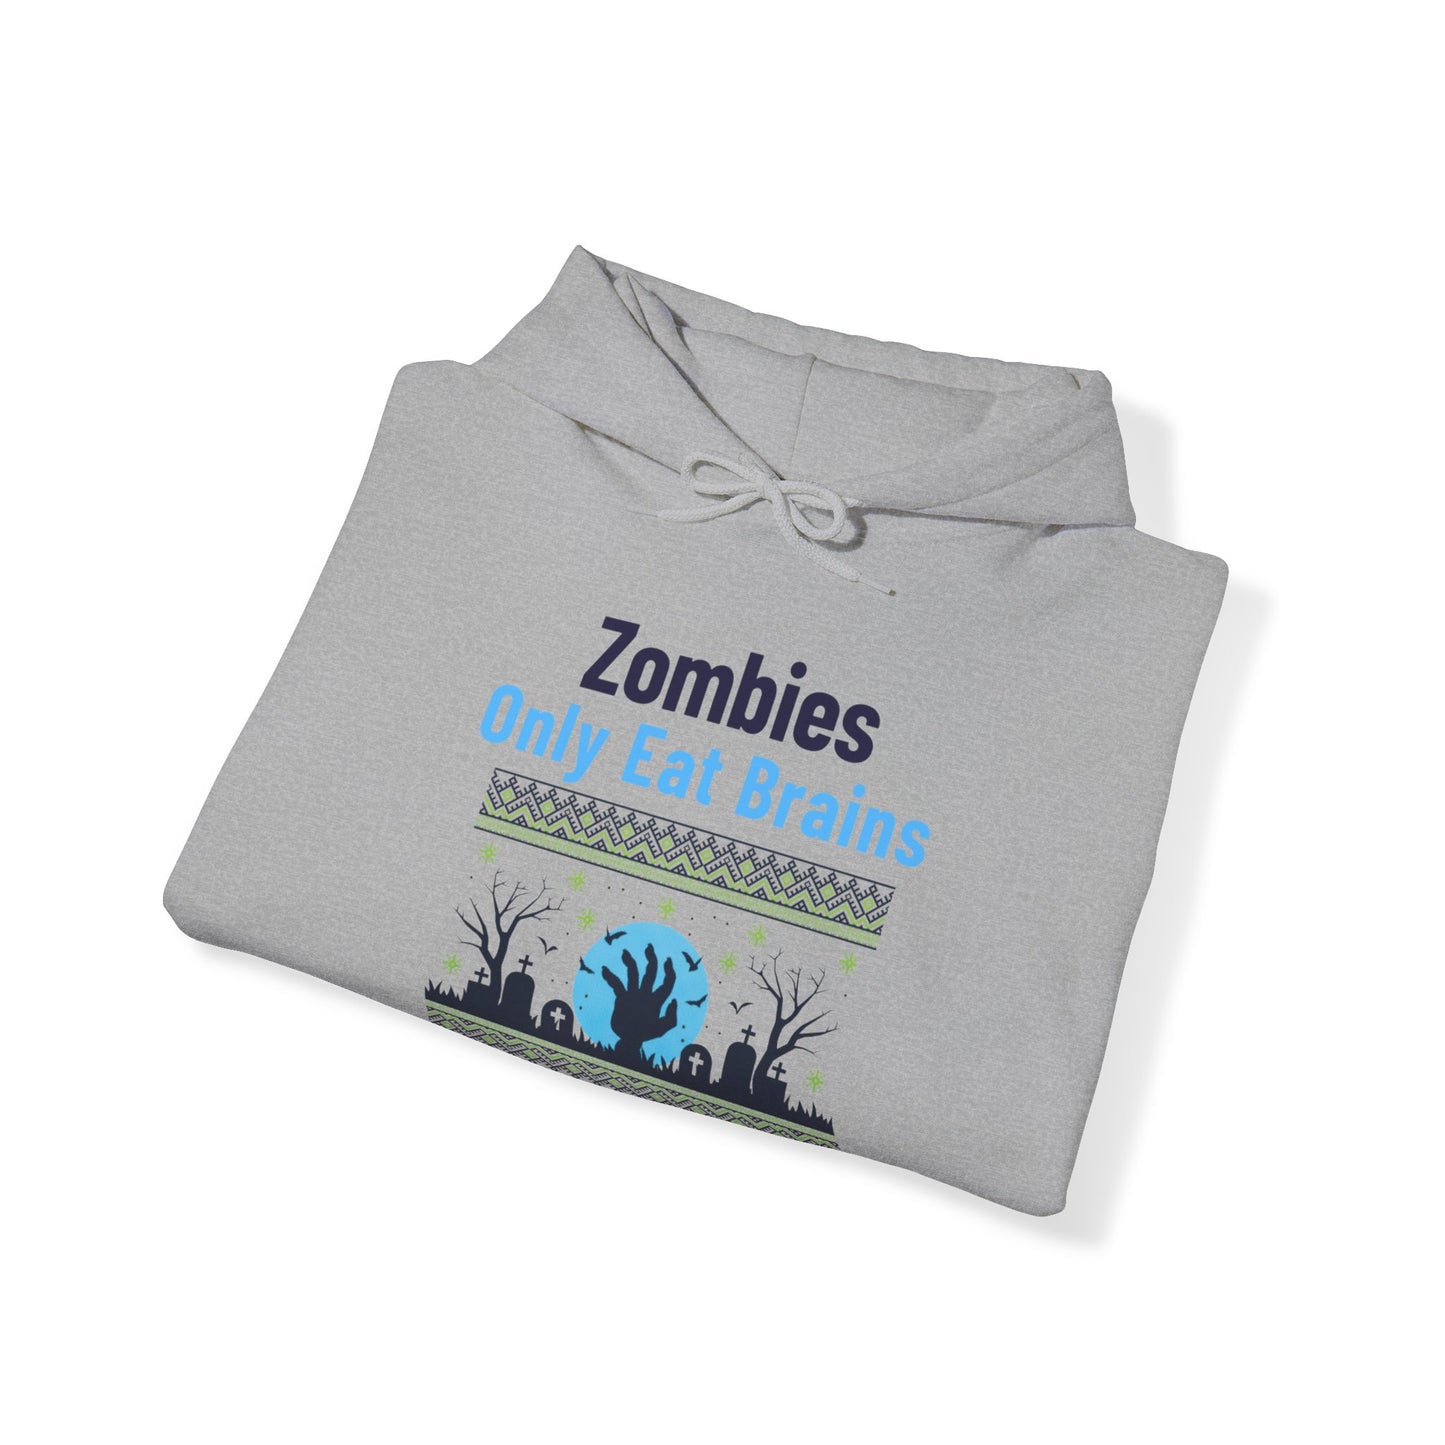 Hoodie - Sarcastic - Zombies Only Eat Brains So You Should Be Fine